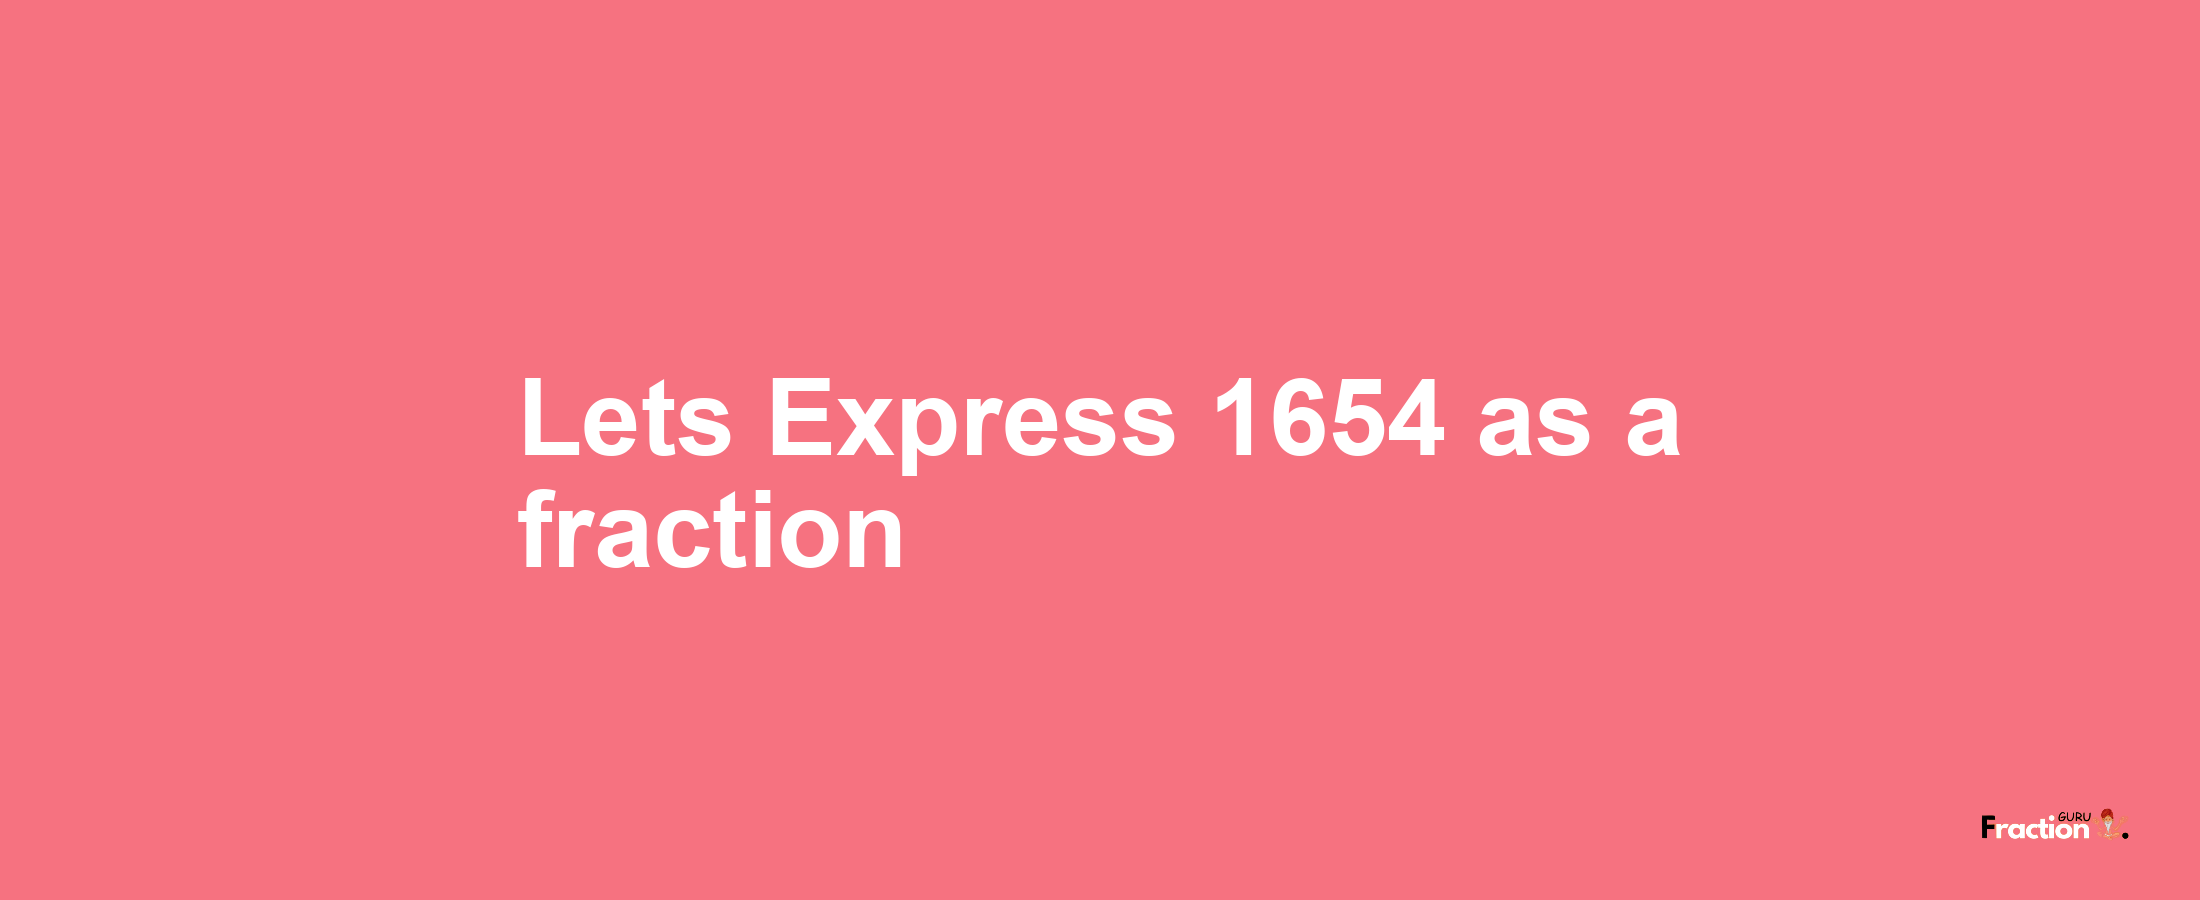 Lets Express 1654 as afraction